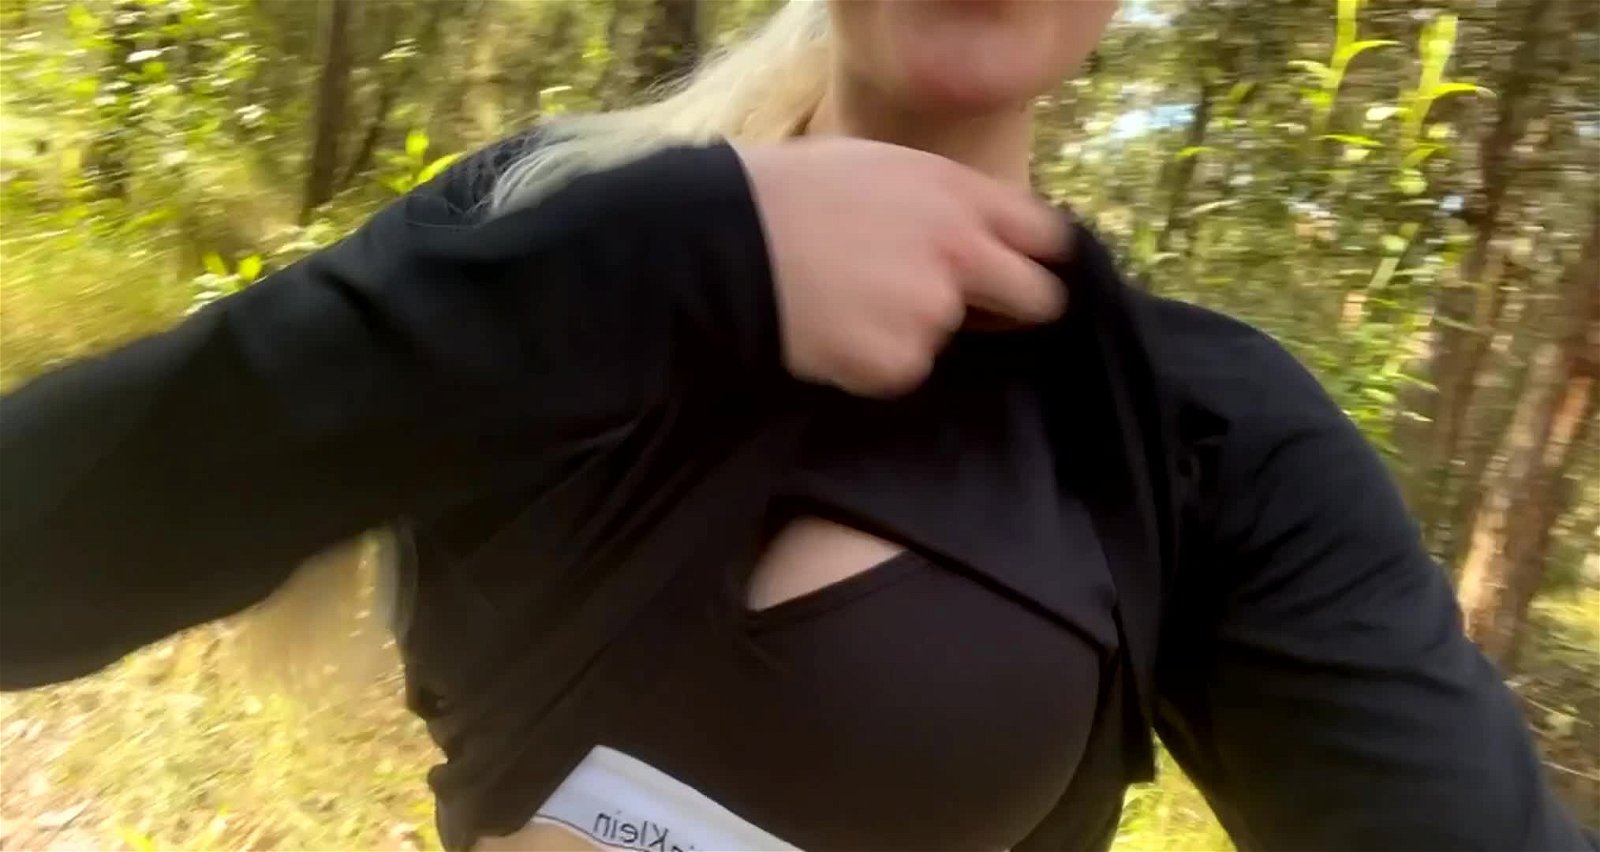 Video post by NaughtyJulie